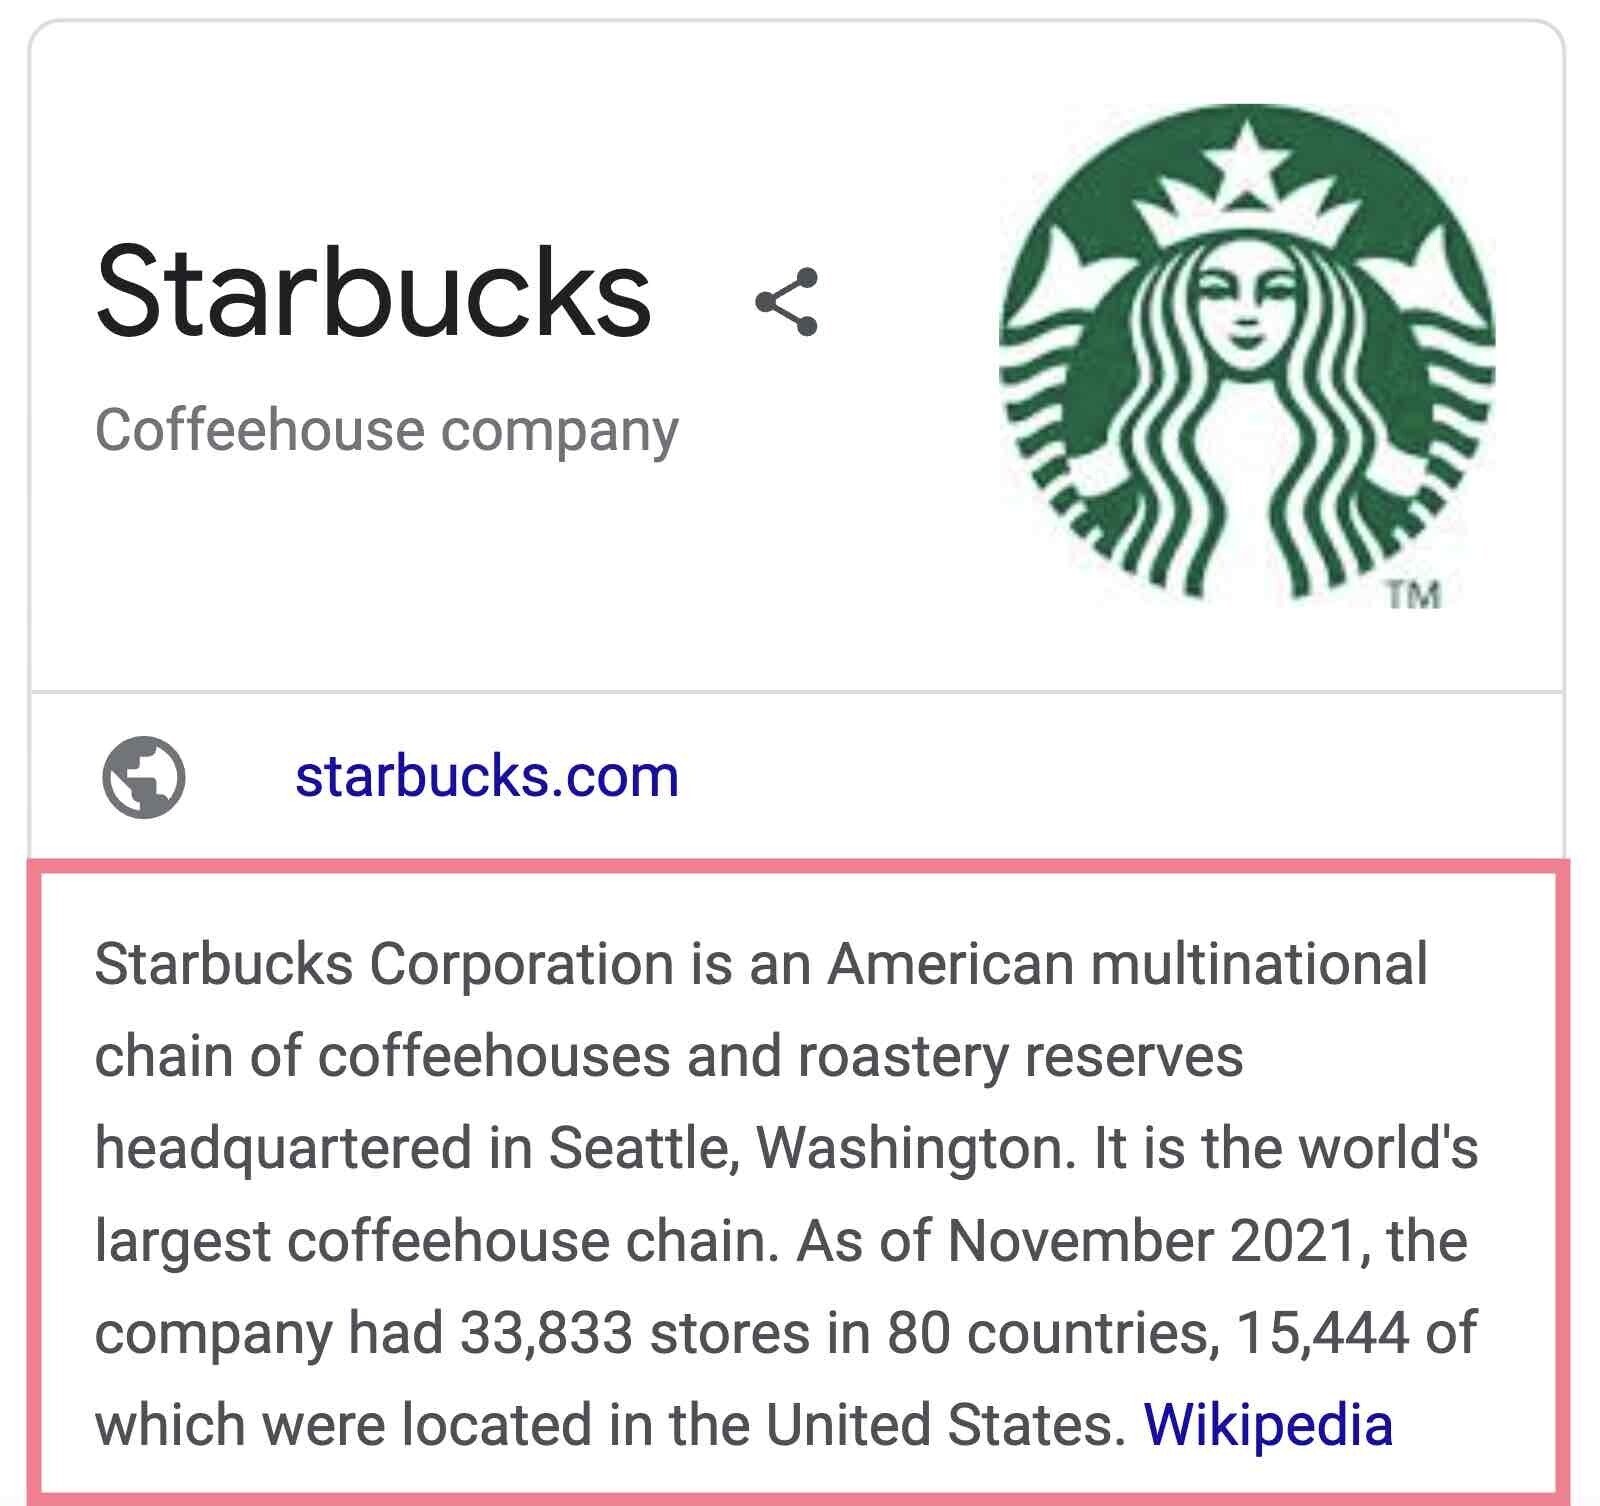 knowledge panel about Starbucks